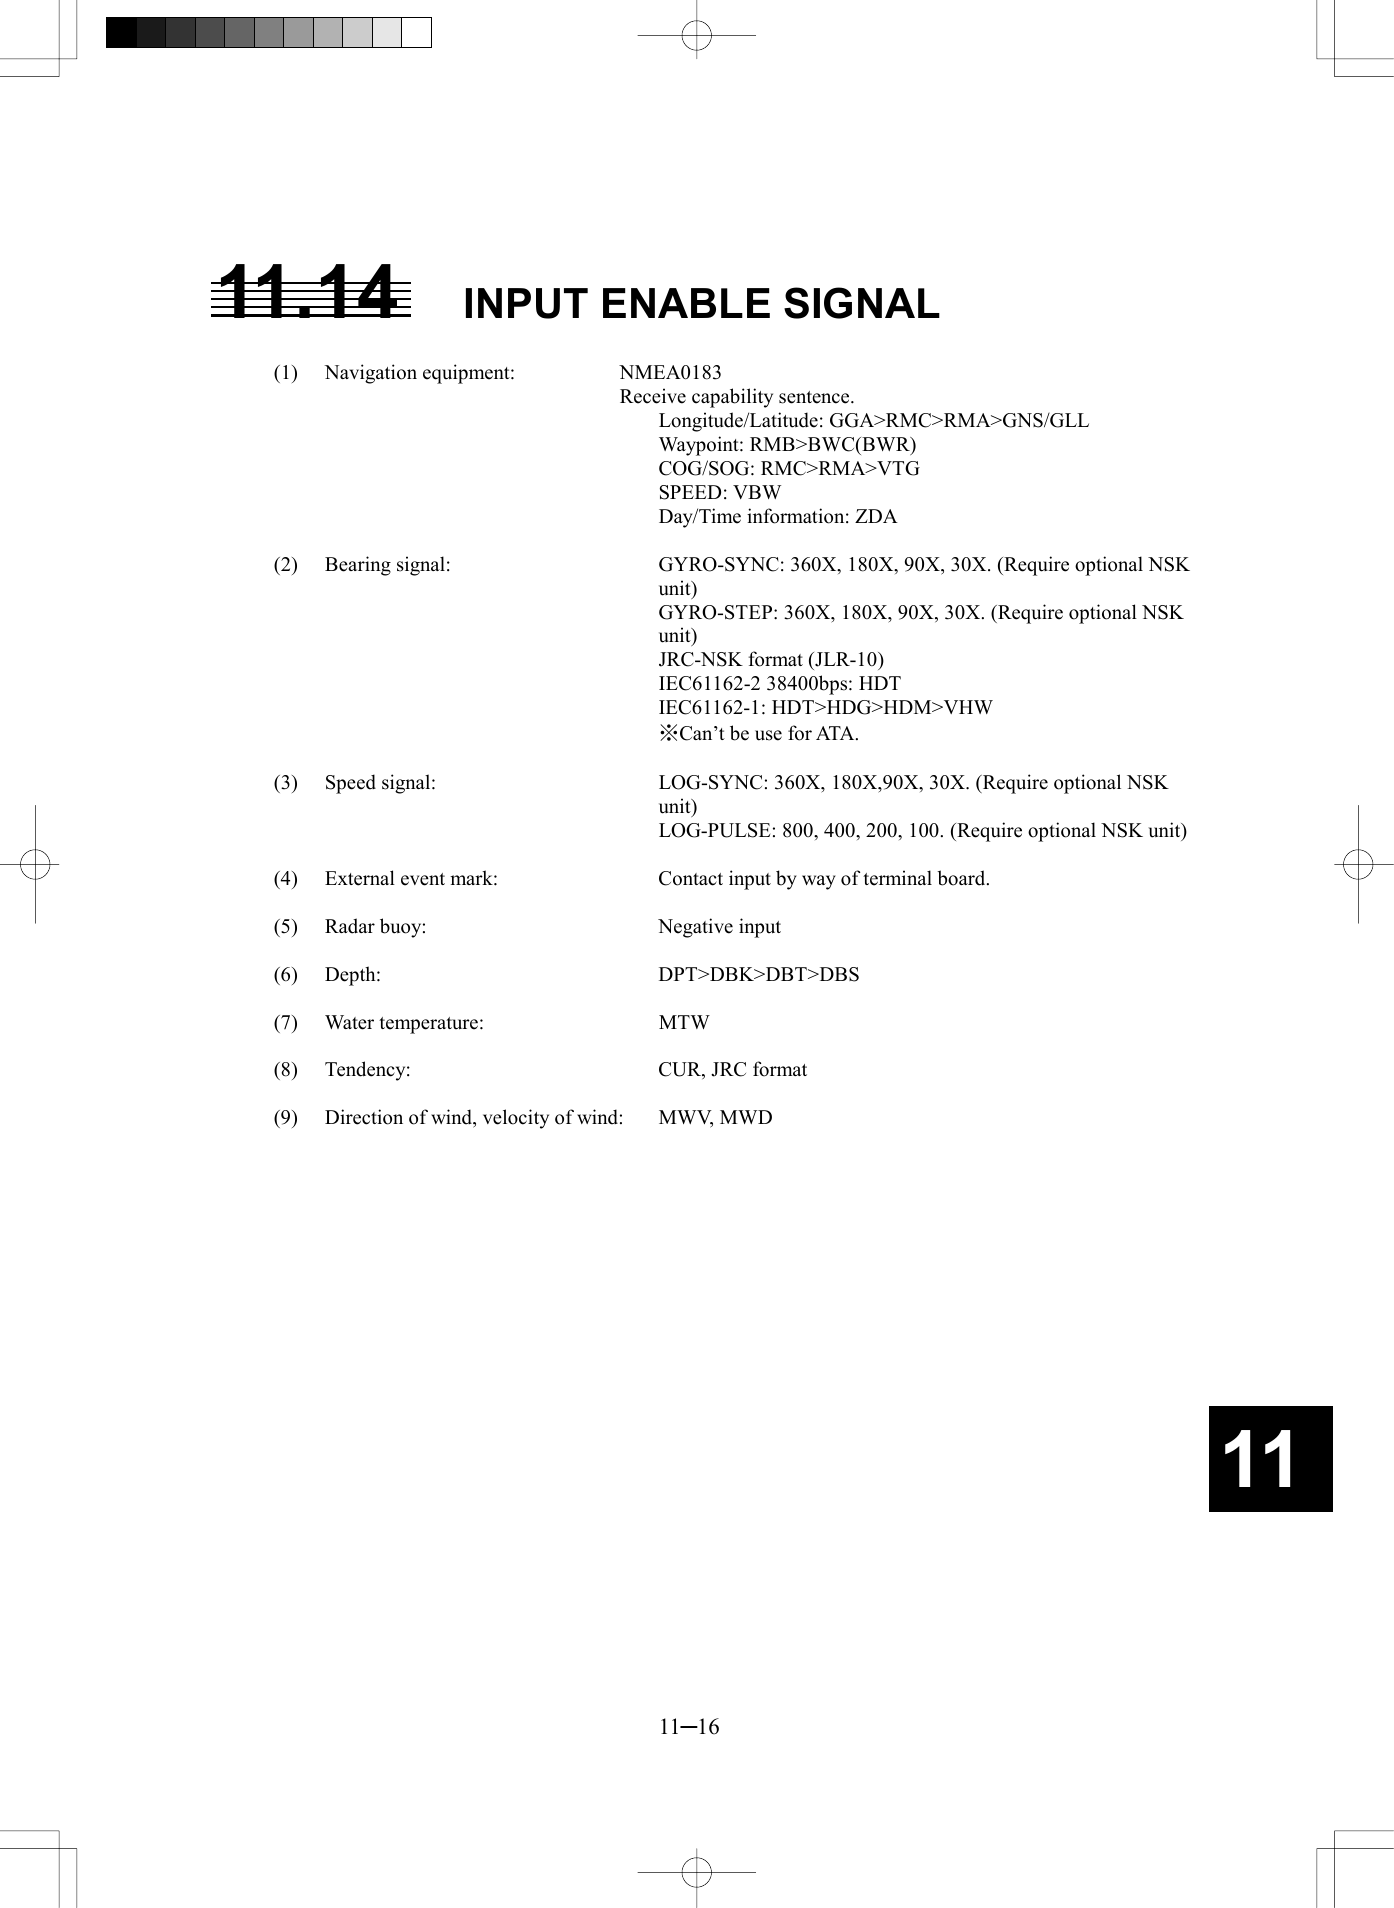   11─16 11 11.14  INPUT ENABLE SIGNAL  (1) Navigation equipment:   NMEA0183     Receive capability sentence.    Longitude/Latitude: GGA&gt;RMC&gt;RMA&gt;GNS/GLL    Waypoint: RMB&gt;BWC(BWR)    COG/SOG: RMC&gt;RMA&gt;VTG    SPEED: VBW     Day/Time information: ZDA  (2)  Bearing signal:  GYRO-SYNC: 360X, 180X, 90X, 30X. (Require optional NSK unit)     GYRO-STEP: 360X, 180X, 90X, 30X. (Require optional NSK unit)     JRC-NSK format (JLR-10)     IEC61162-2 38400bps: HDT    IEC61162-1: HDT&gt;HDG&gt;HDM&gt;VHW     ※Can’t be use for ATA.  (3)  Speed signal:  LOG-SYNC: 360X, 180X,90X, 30X. (Require optional NSK unit)     LOG-PULSE: 800, 400, 200, 100. (Require optional NSK unit)  (4)  External event mark:    Contact input by way of terminal board.  (5)  Radar buoy:    Negative input  (6) Depth:   DPT&gt;DBK&gt;DBT&gt;DBS  (7) Water temperature:   MTW  (8)  Tendency:    CUR, JRC format  (9)  Direction of wind, velocity of wind:    MWV, MWD  